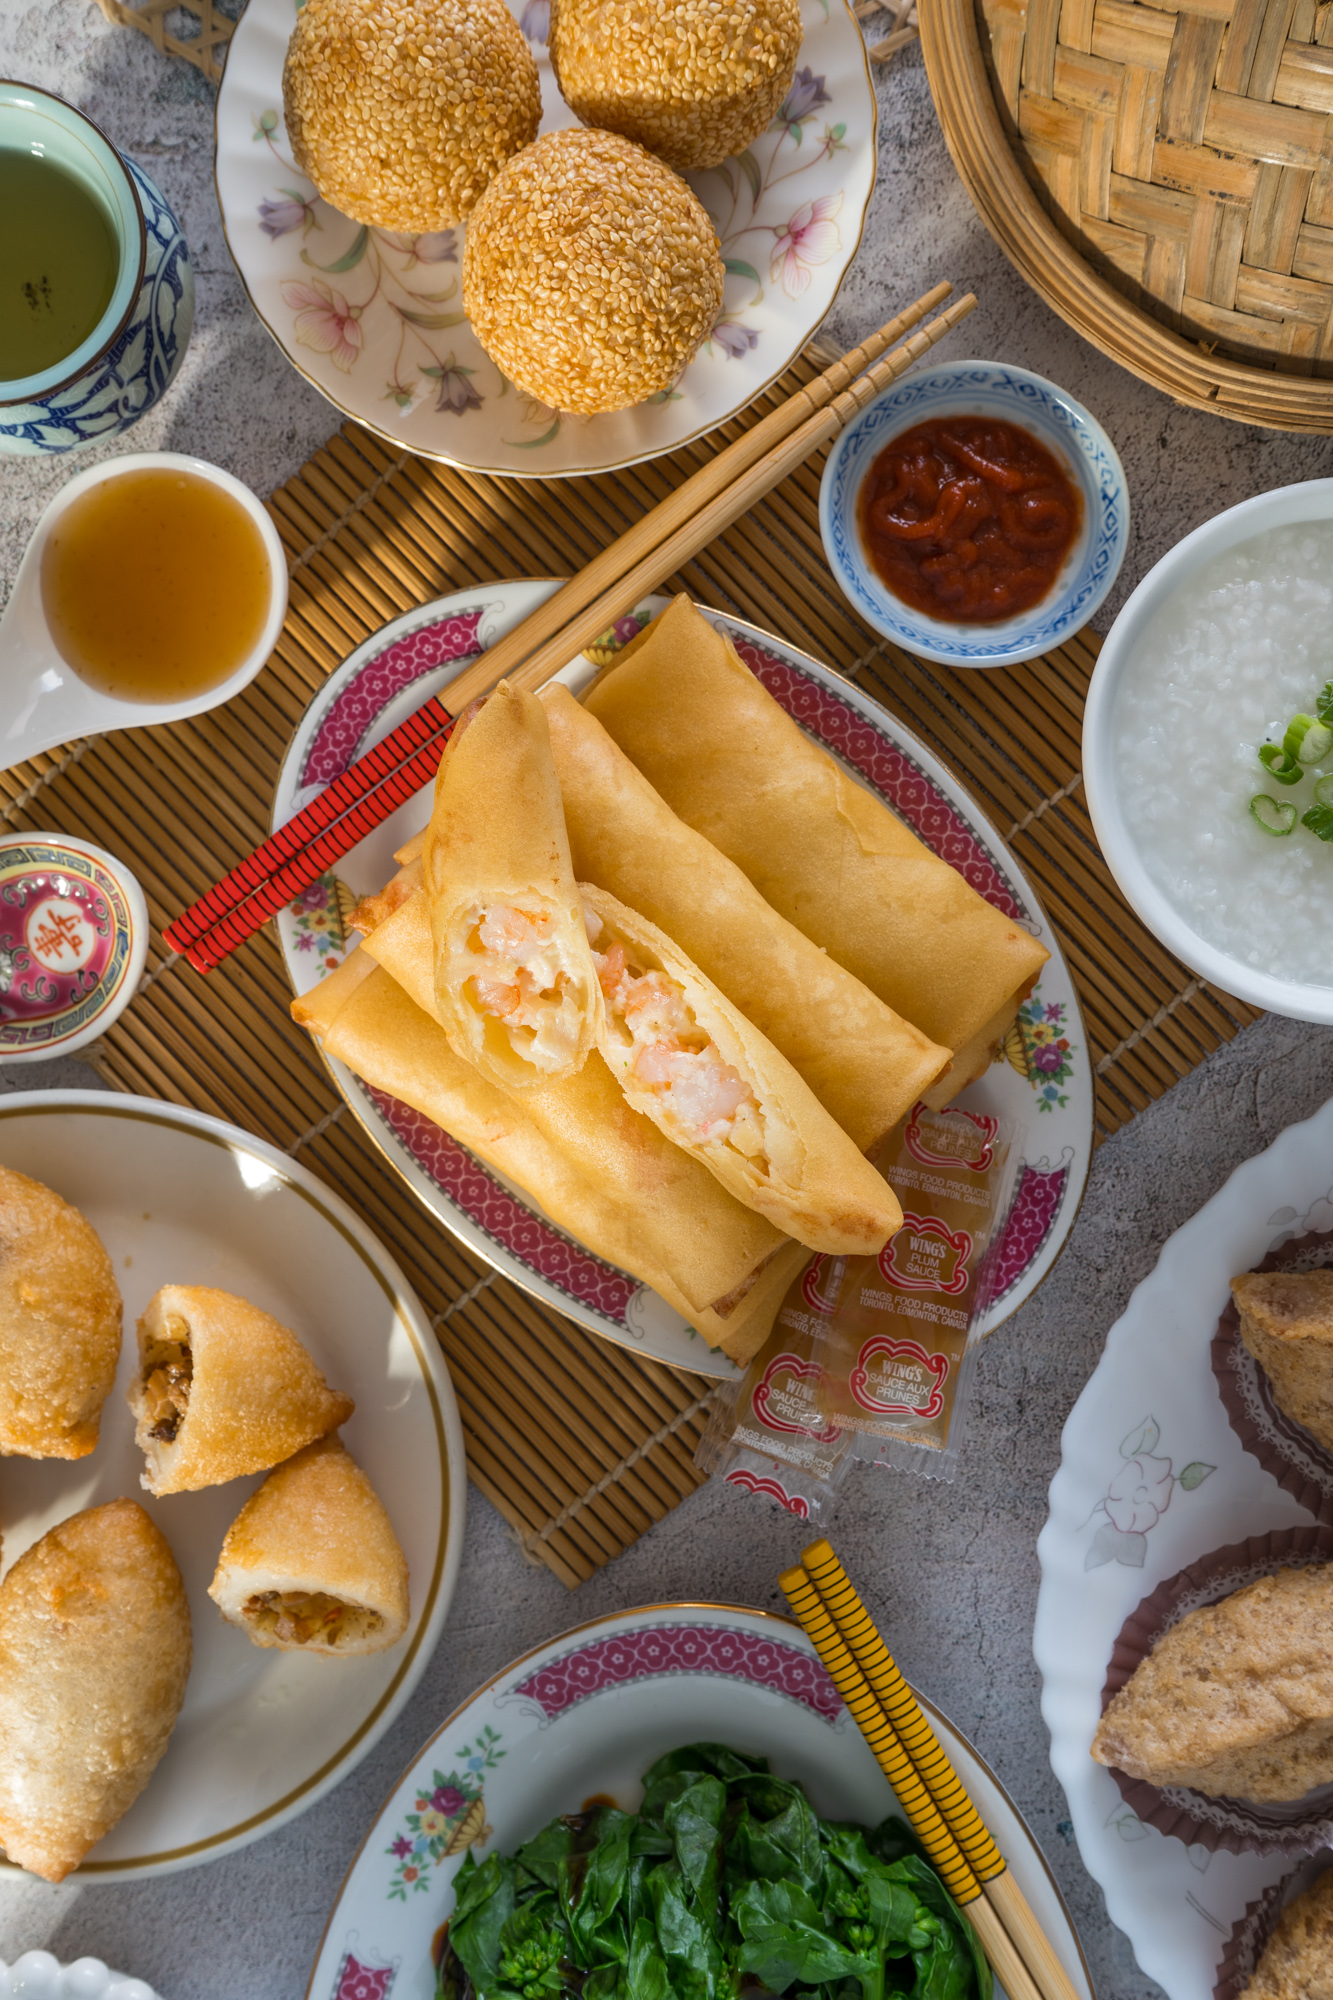 Crispy & Succulent Seafood Spring Rolls Recipe (Better Than Take-Out!)